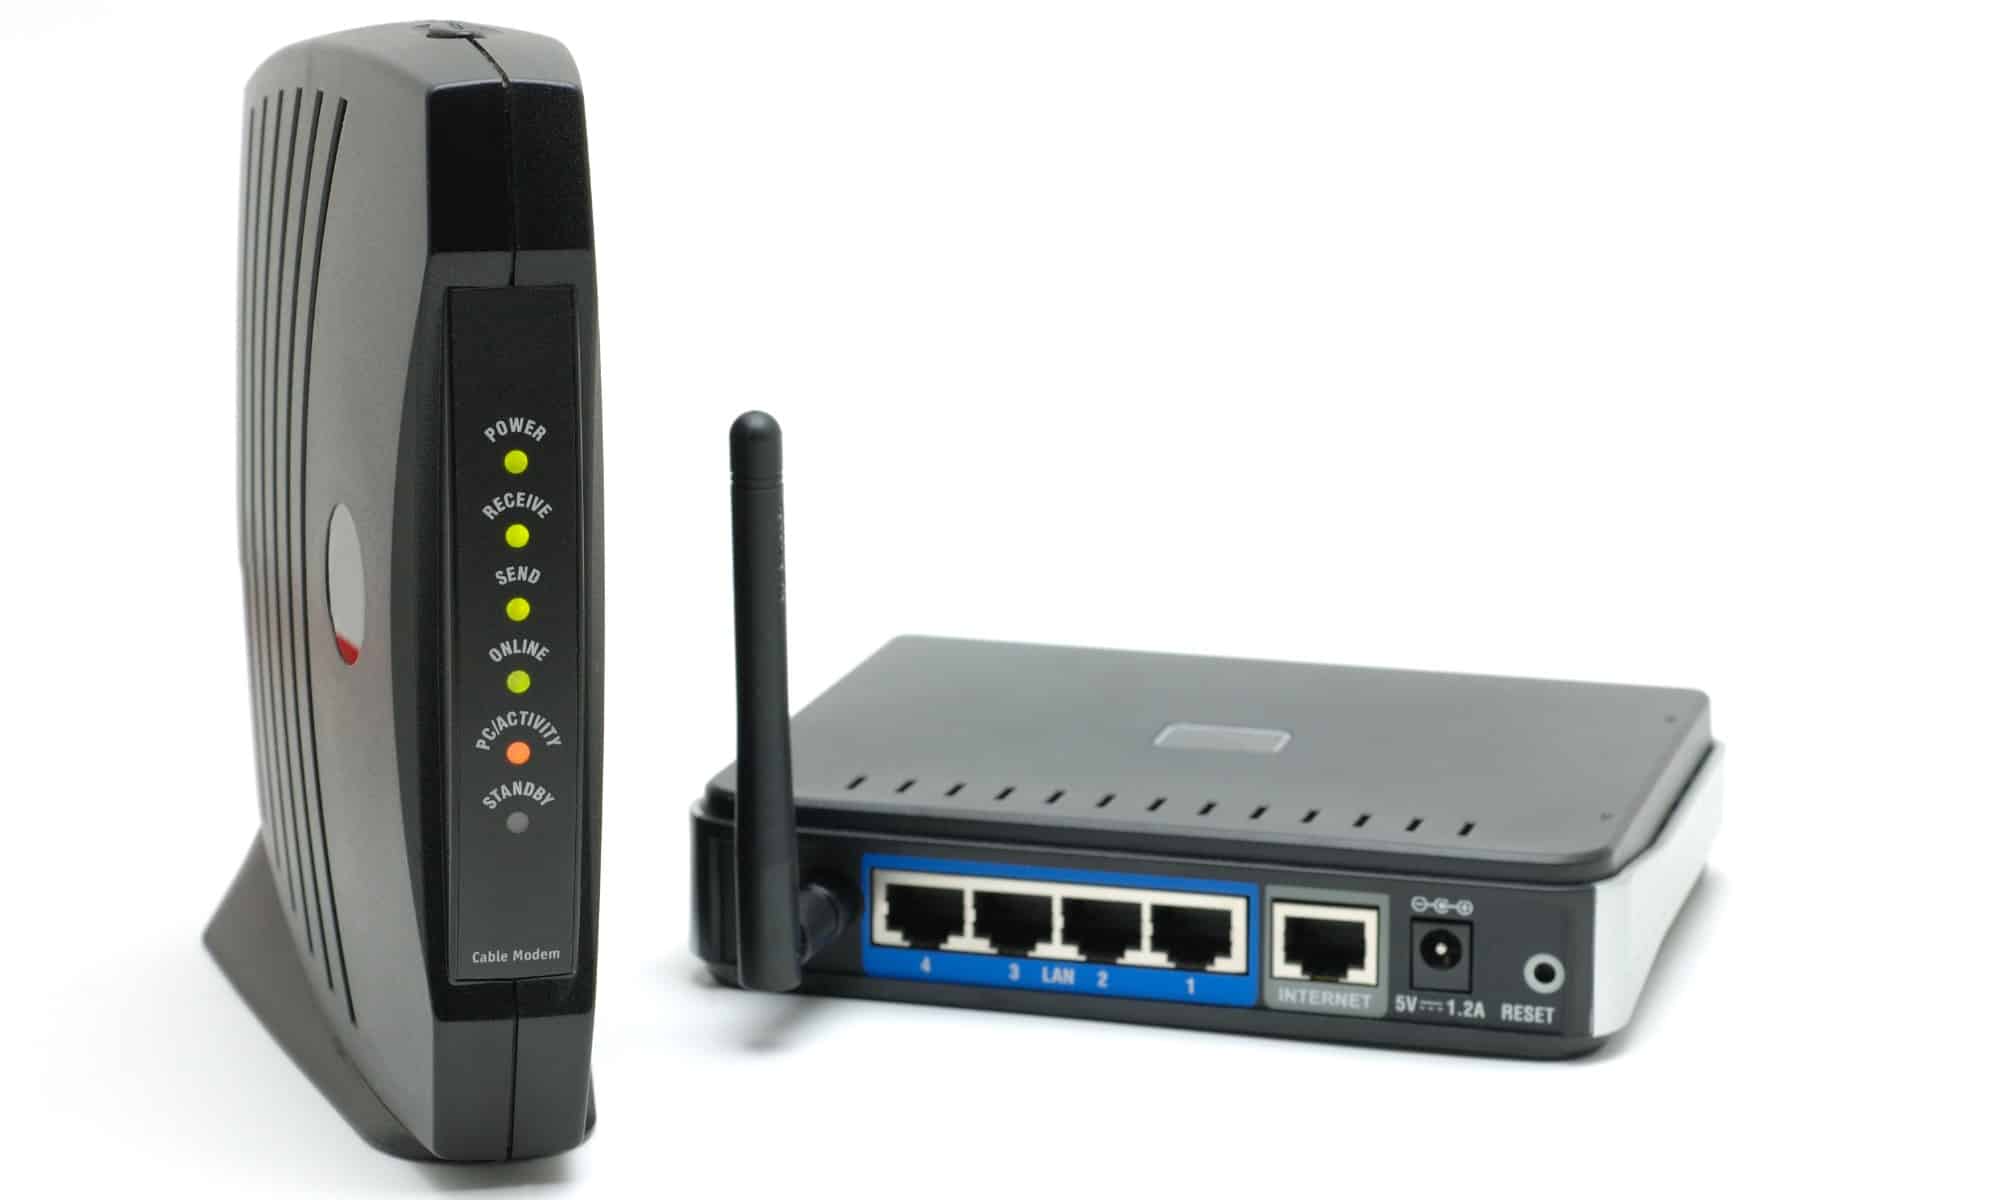 Spectrum Modem Vs Router: What's the Difference?